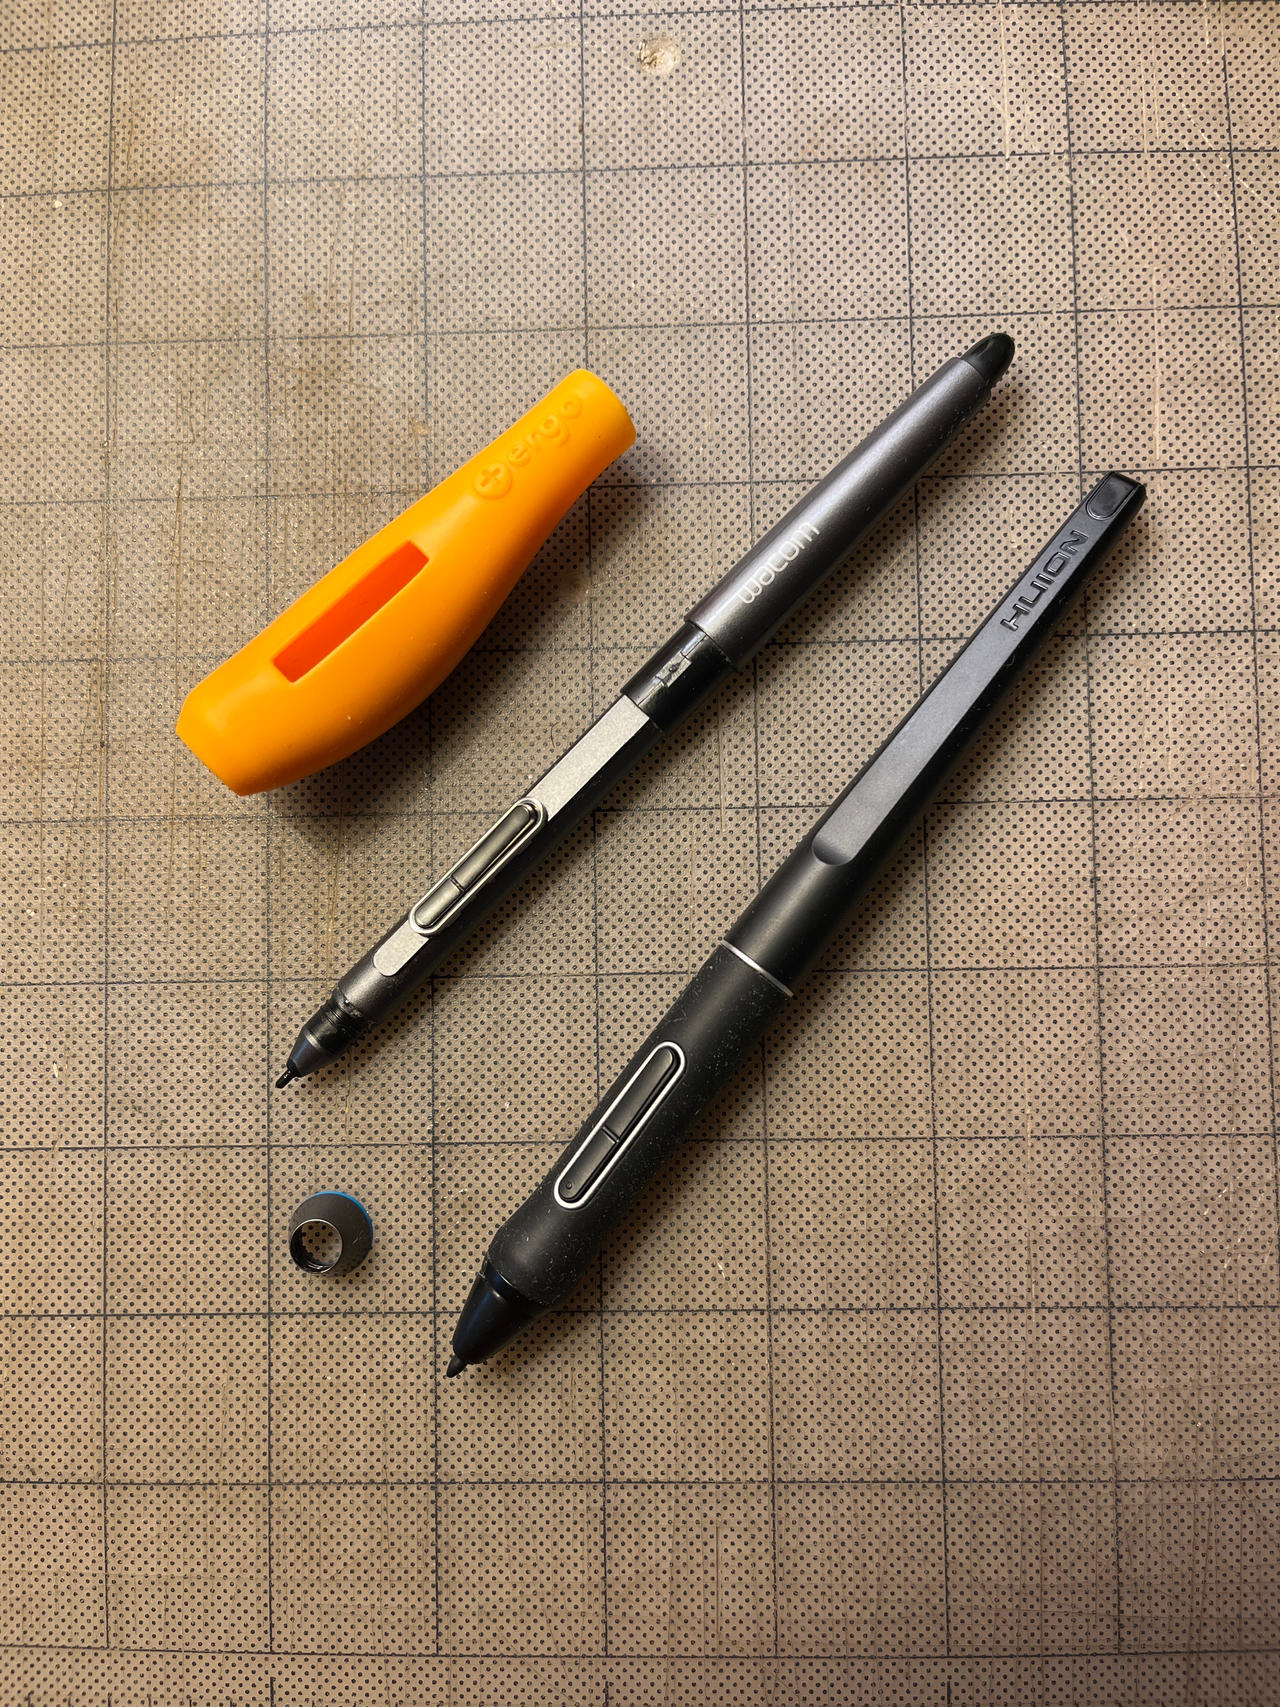 Review of the different Wacom pen nibs - English by Lily-Fu on DeviantArt